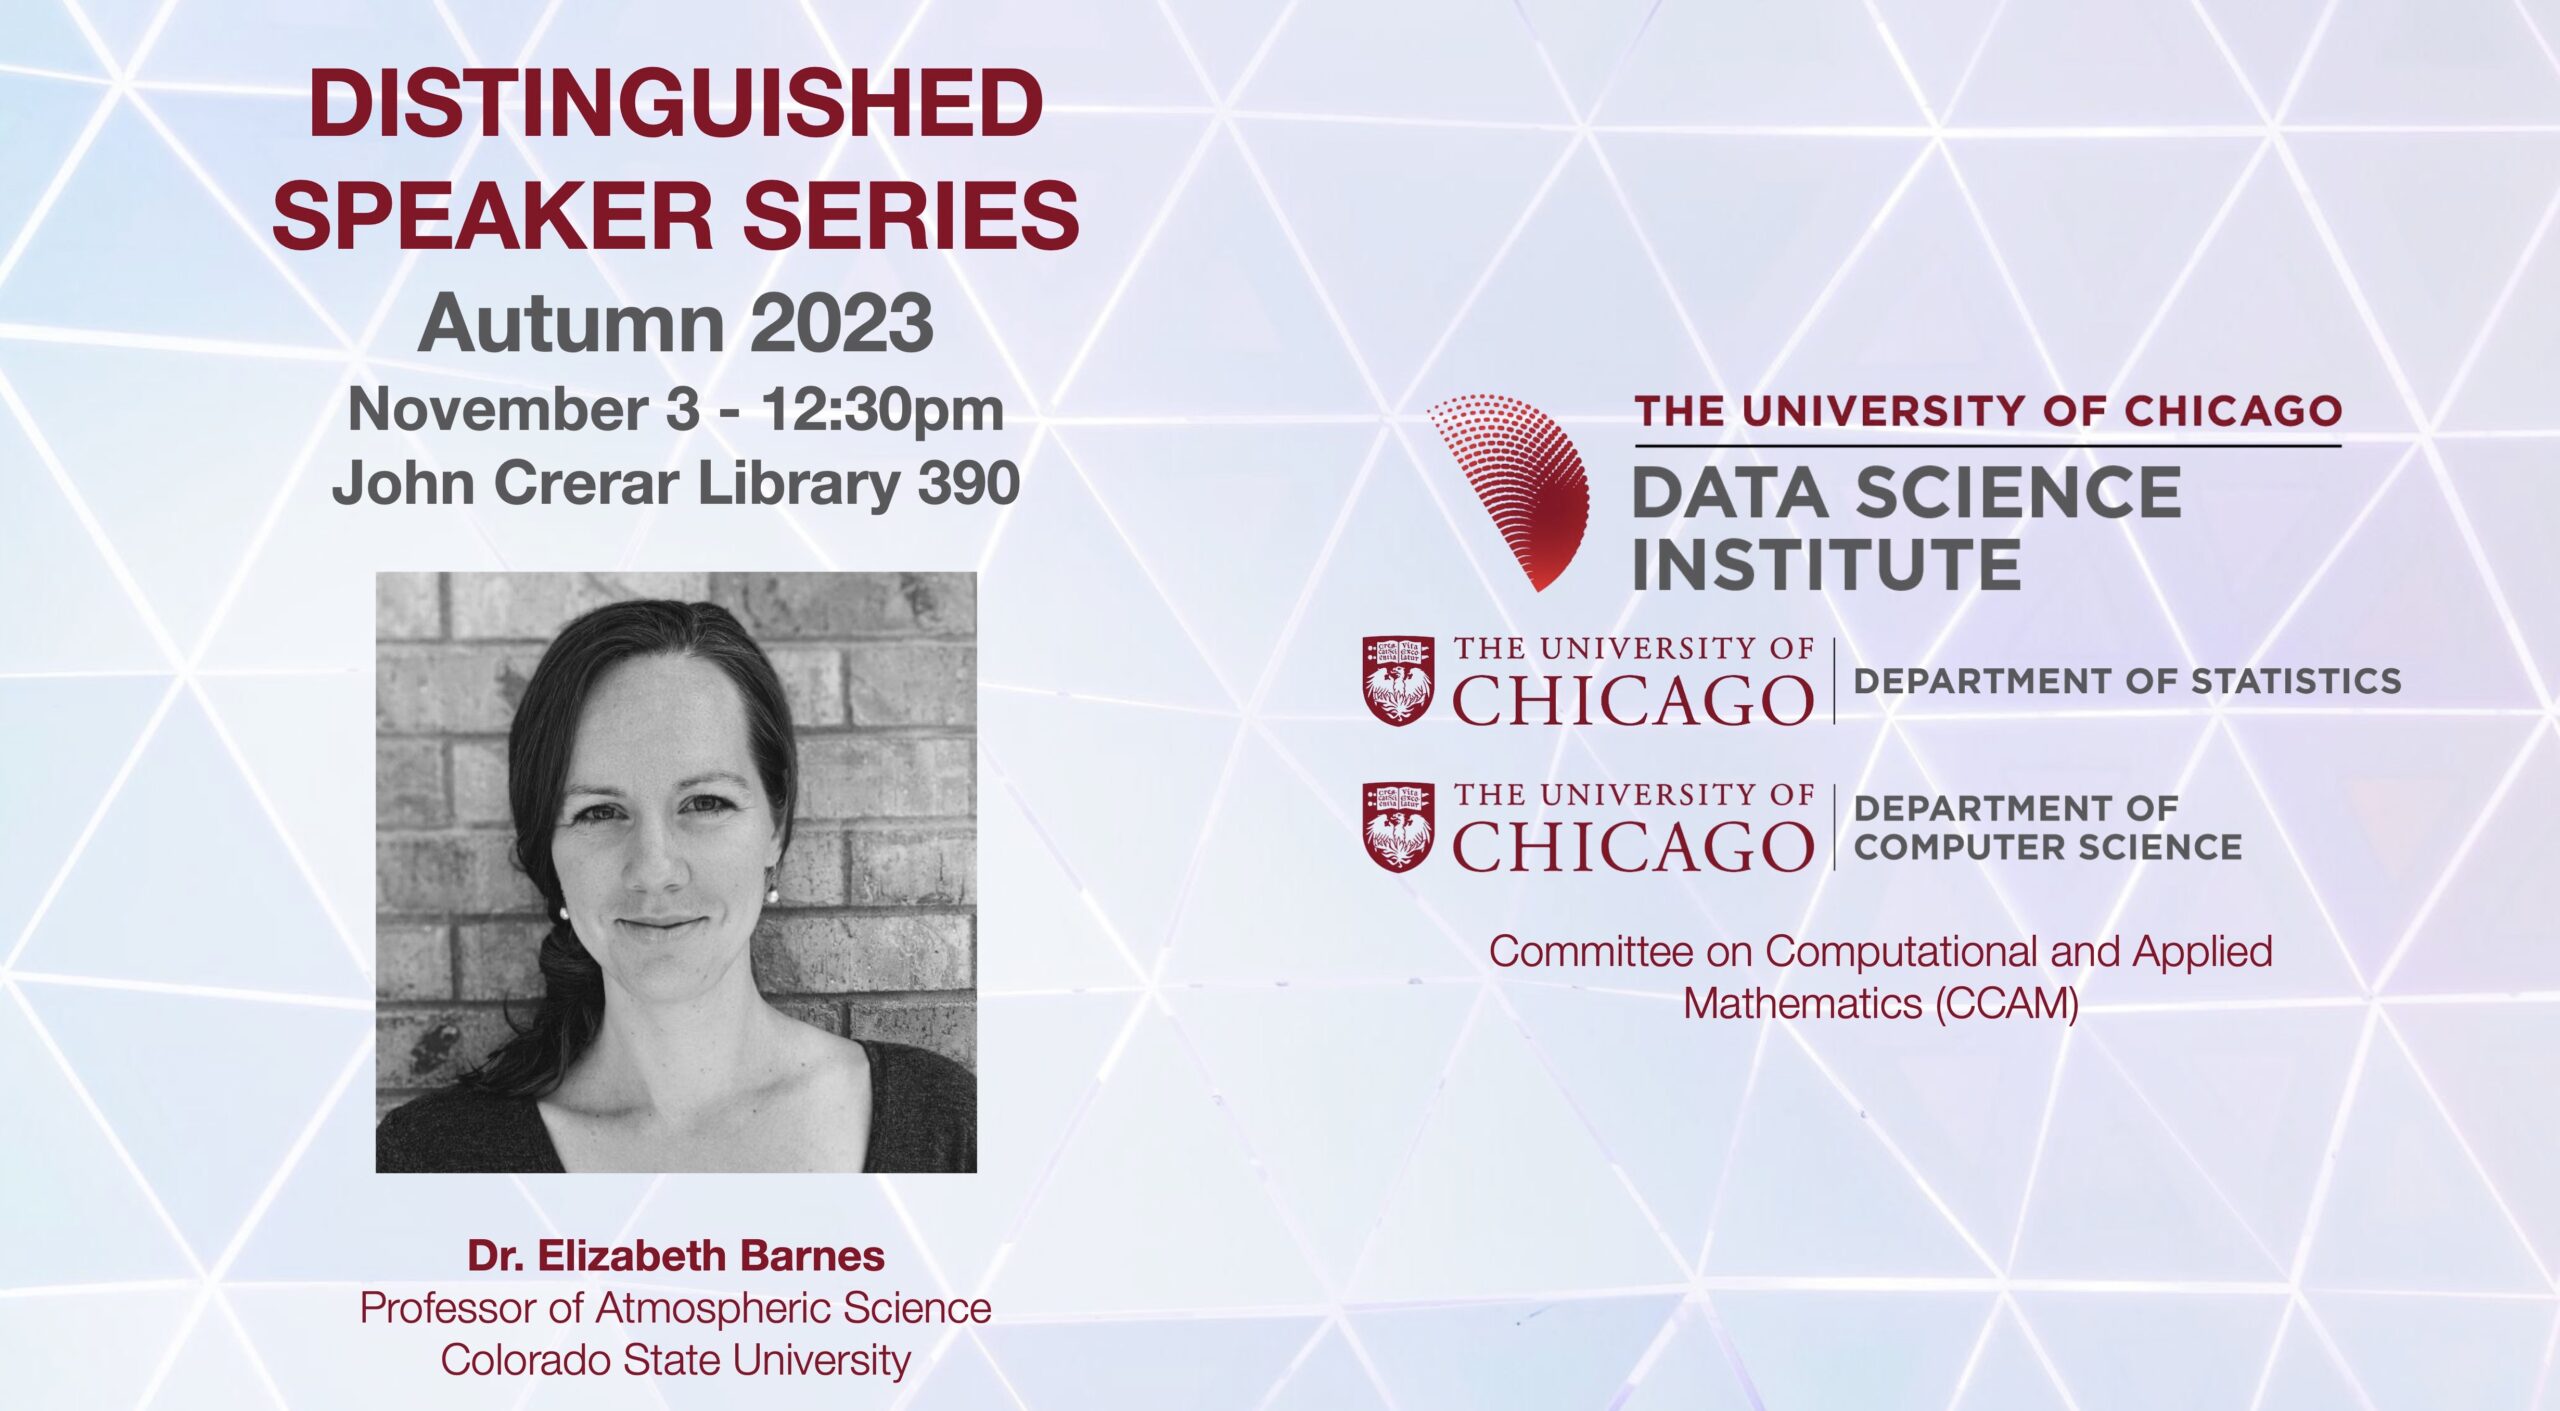 A headshot of Elizabeth Barnes is accompanied by text describing the Distinguished Speaker Series event: it takes place at 12:30pm in John Crerar Library Room 390.